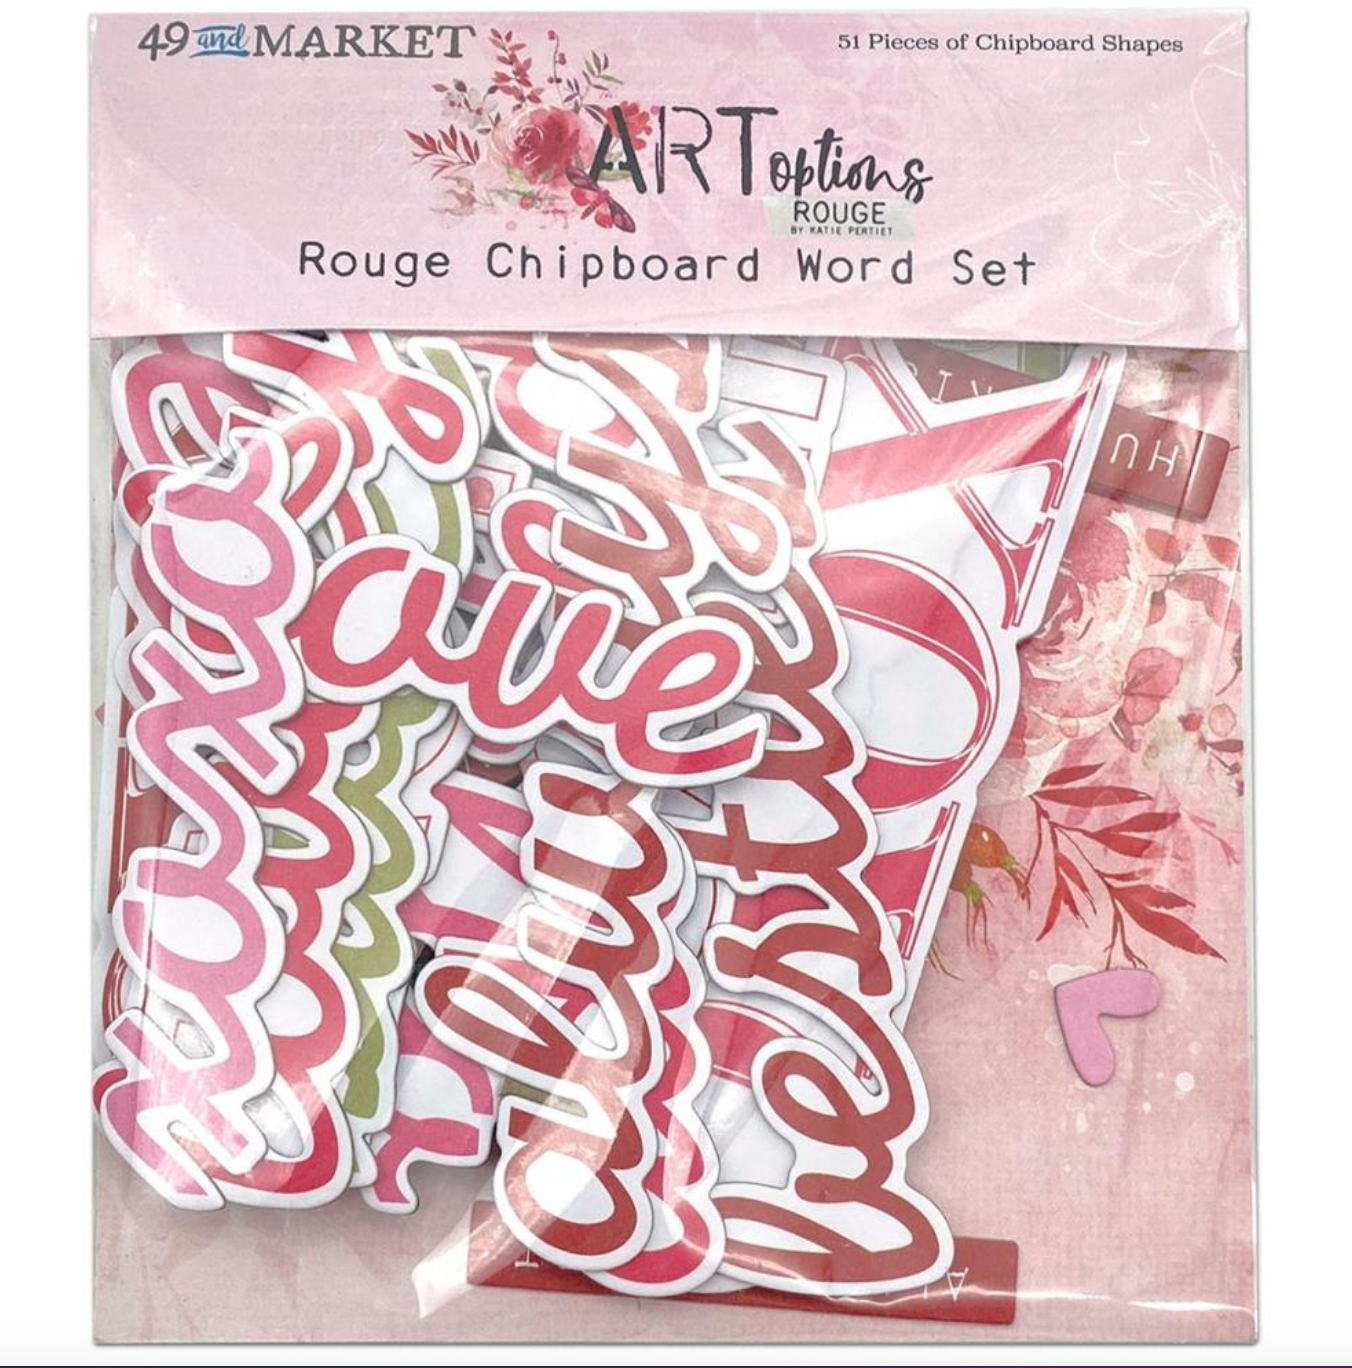 Chipboard Word Set - ART Options Rouge - 49 and Market